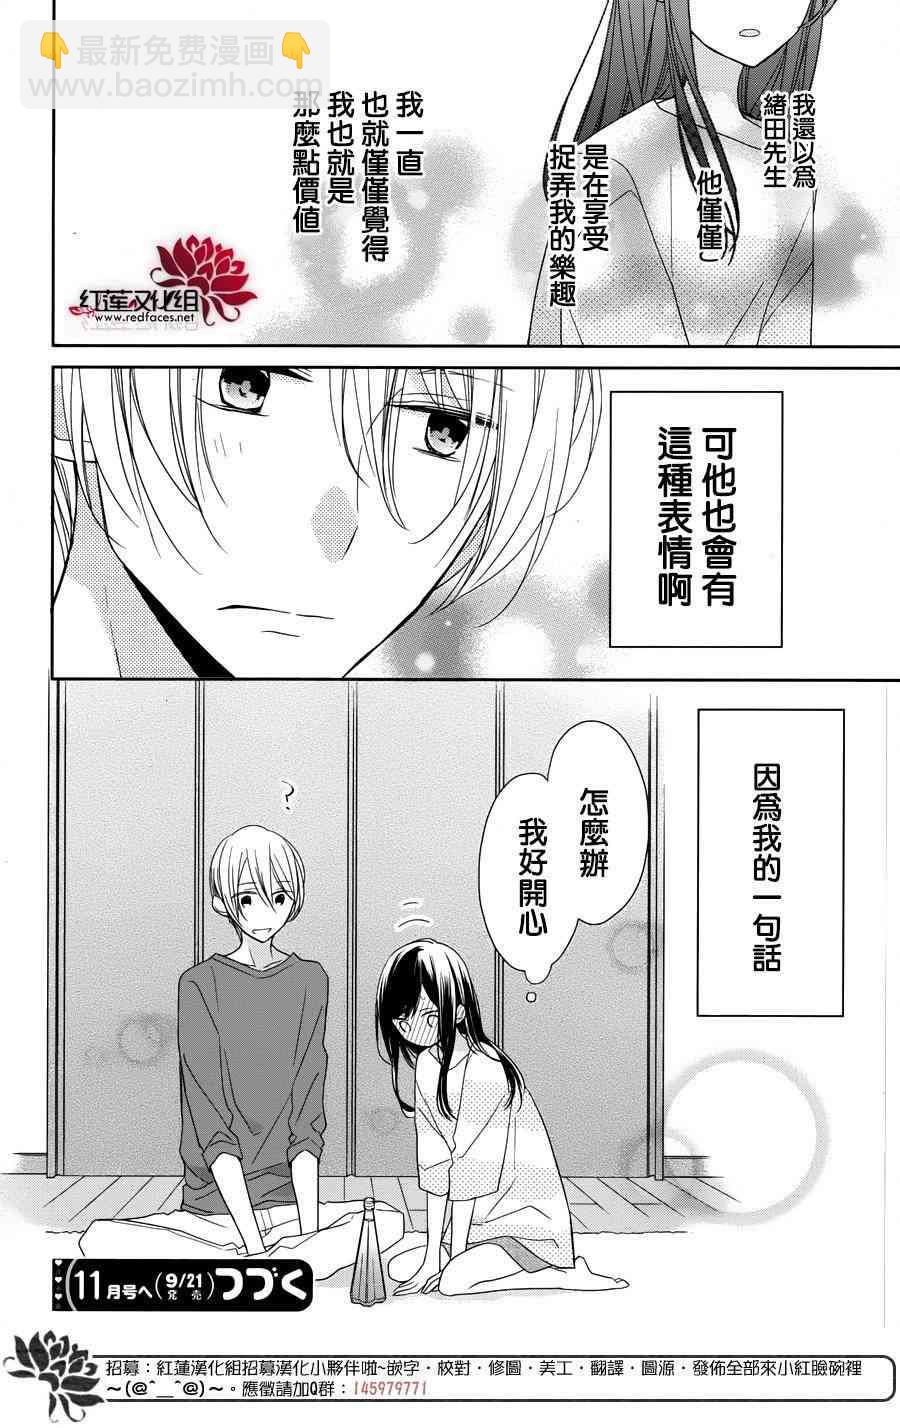 If given a second chance - 3話 - 2